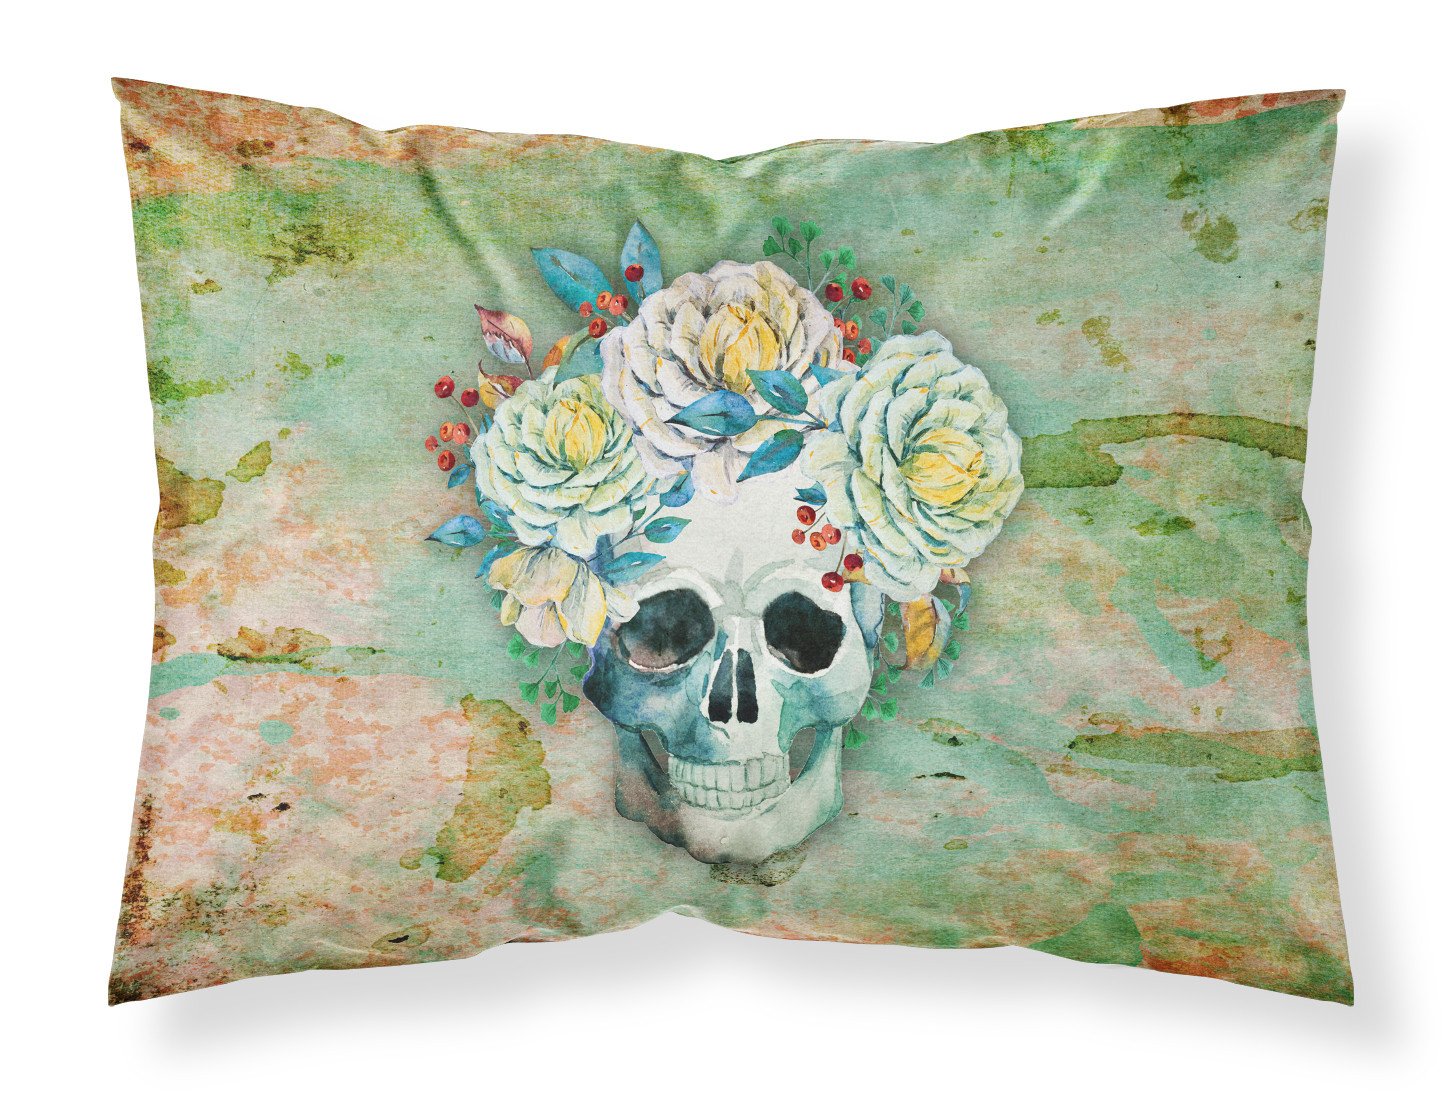 Day of the Dead Skull with Flowers Fabric Standard Pillowcase BB5124PILLOWCASE by Caroline's Treasures